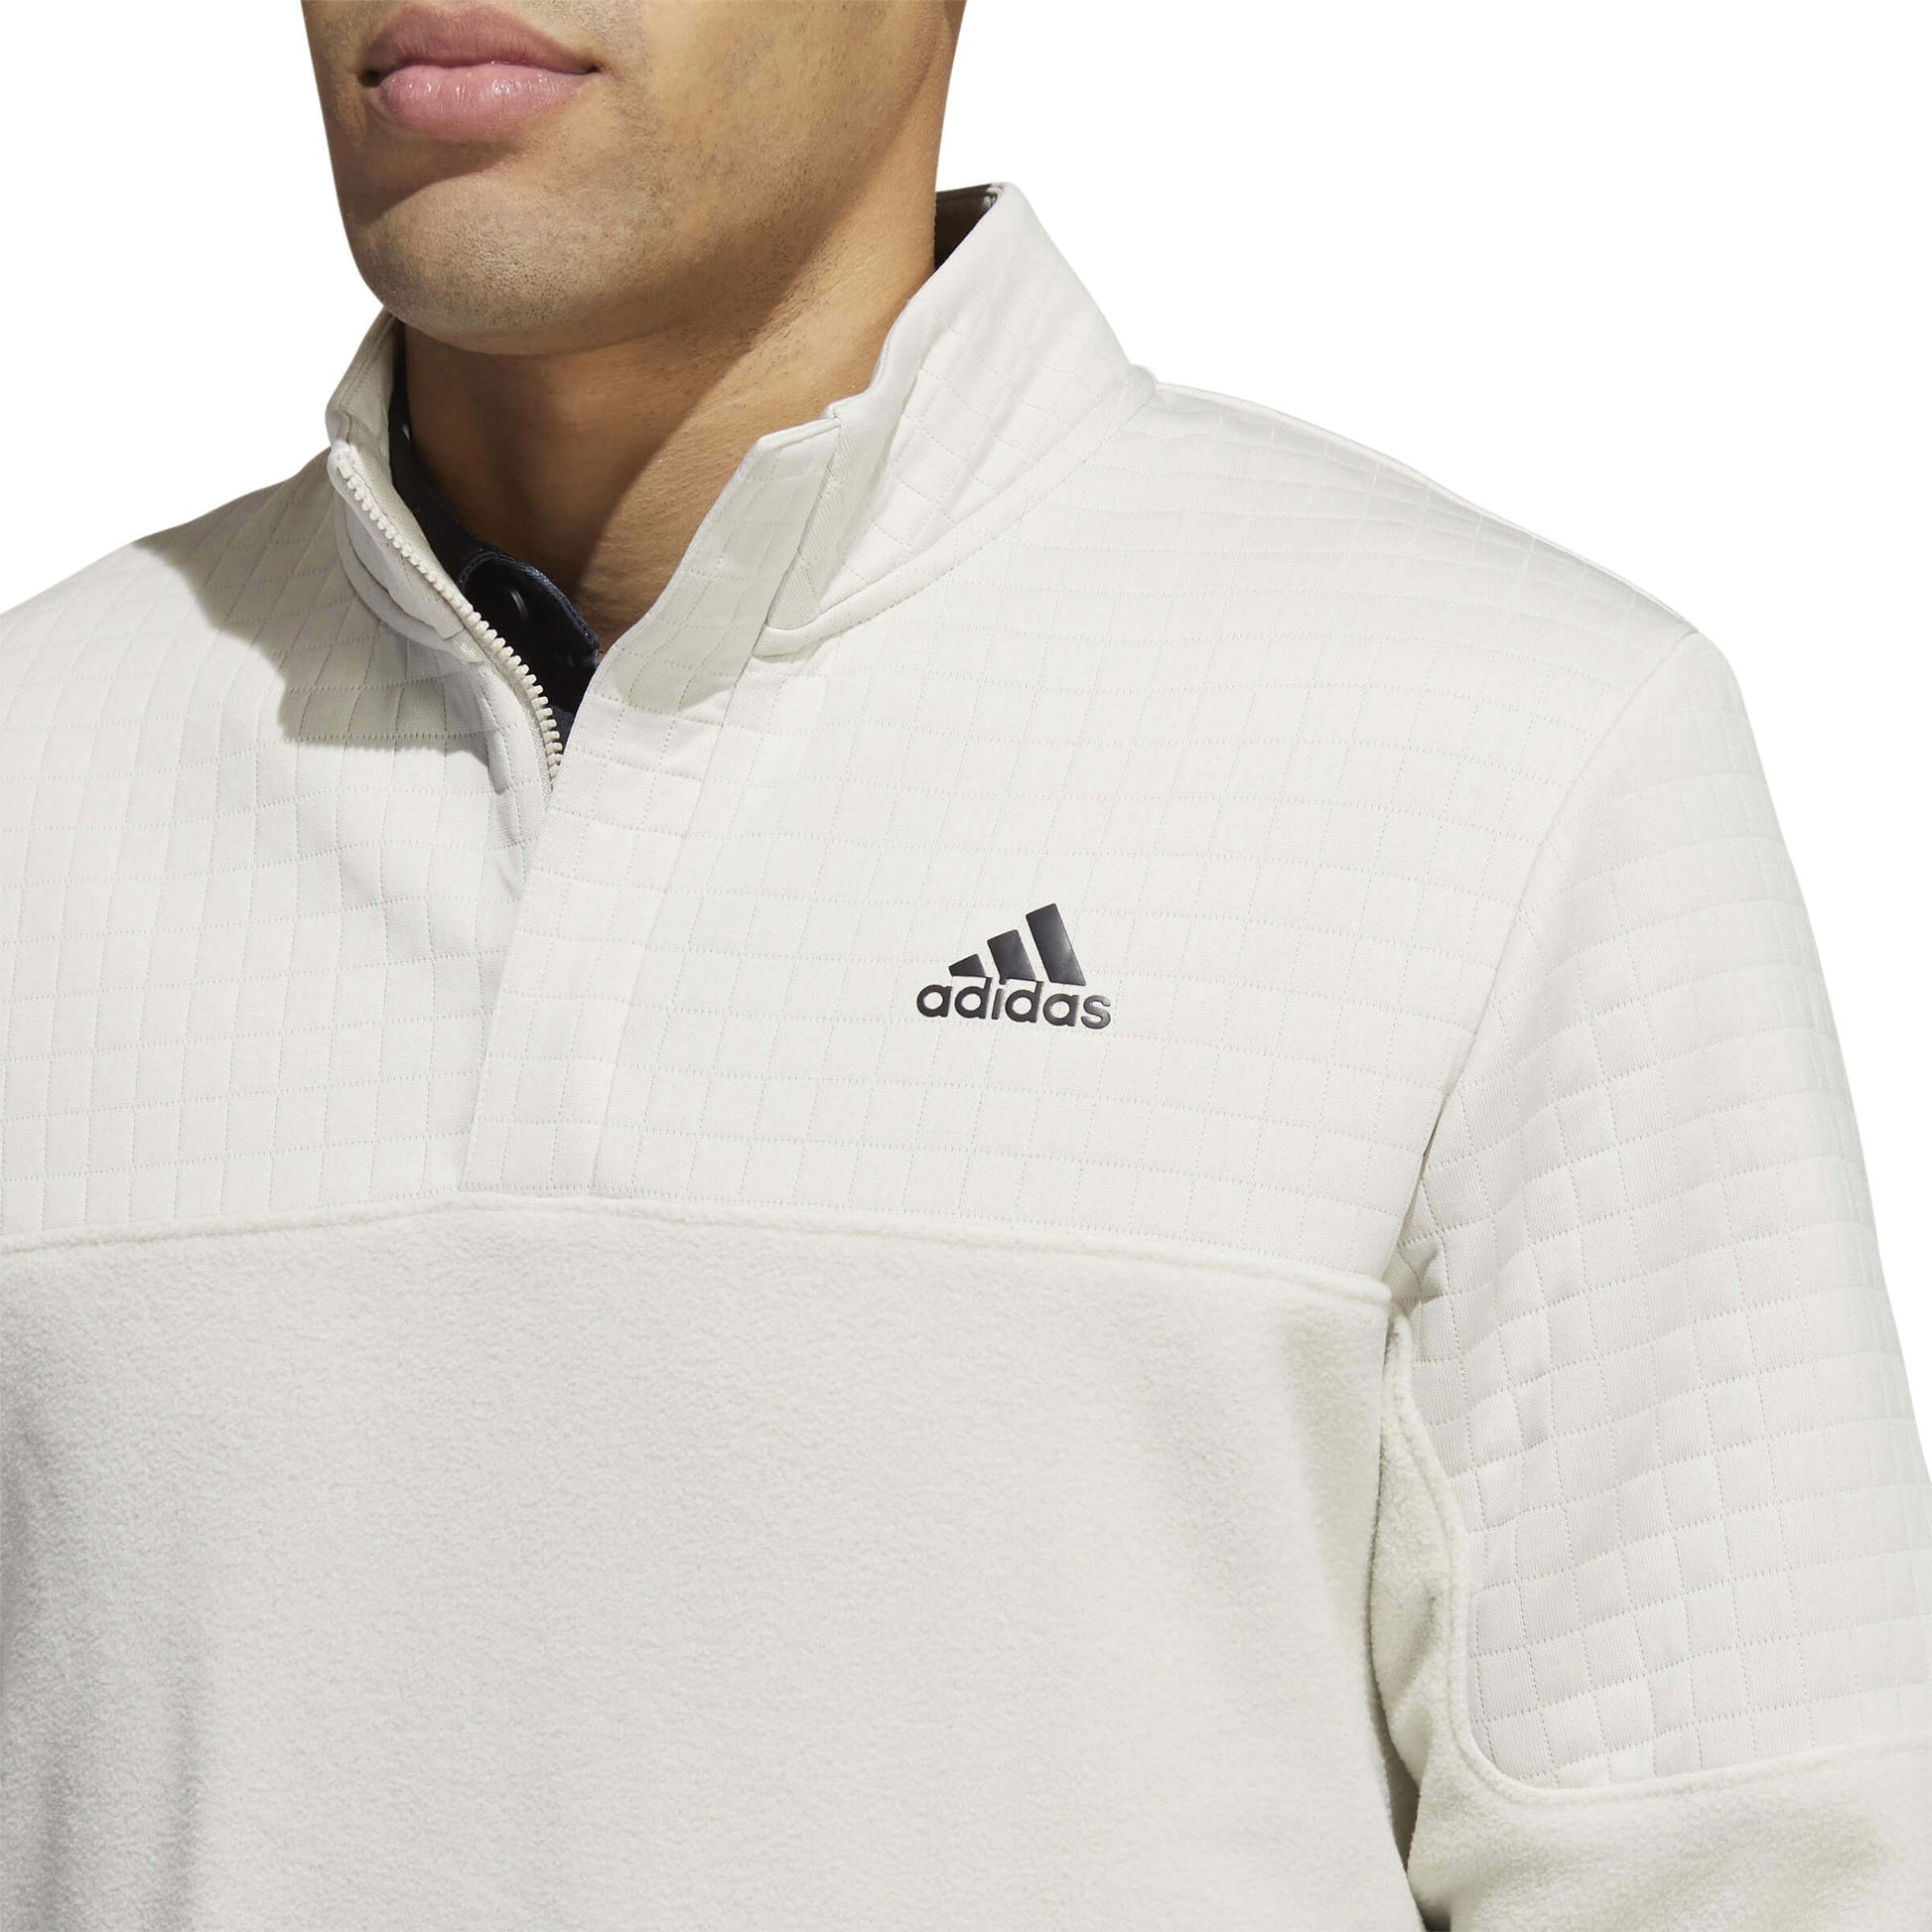  View details for Adidas DWR 1/4 Zip - Clear Brown Adidas DWR 1/4 Zip - Clear Brown